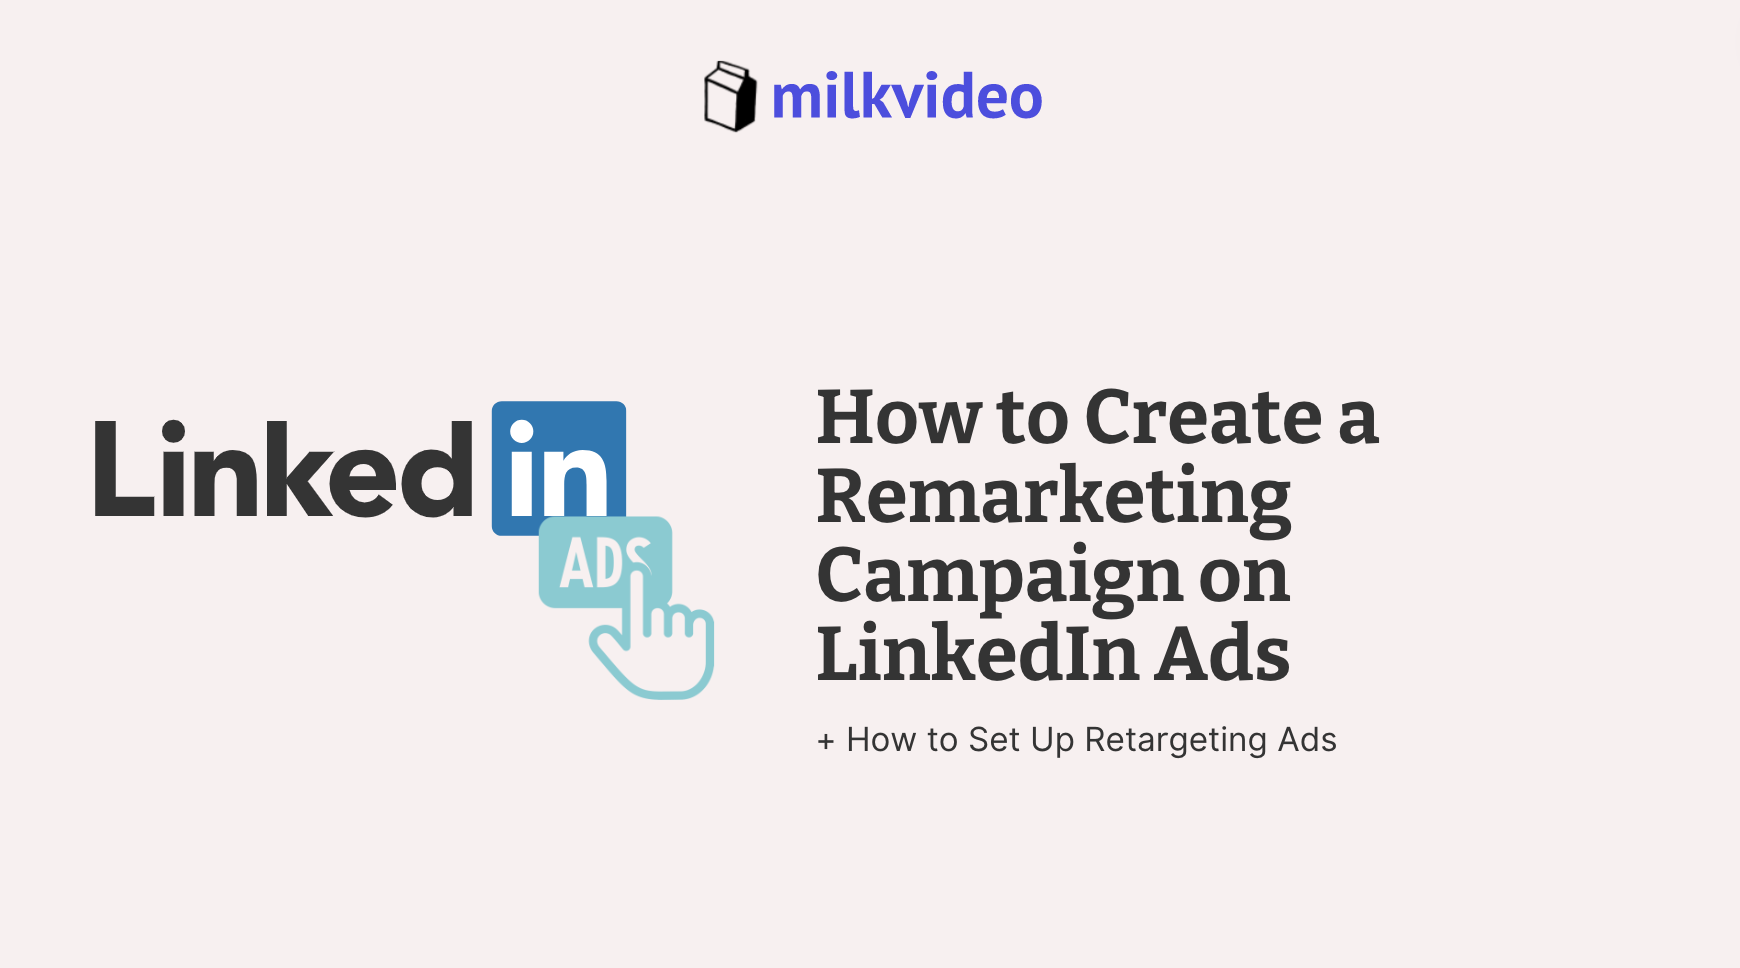 How to Create a Remarketing Campaign on LinkedIn Ads